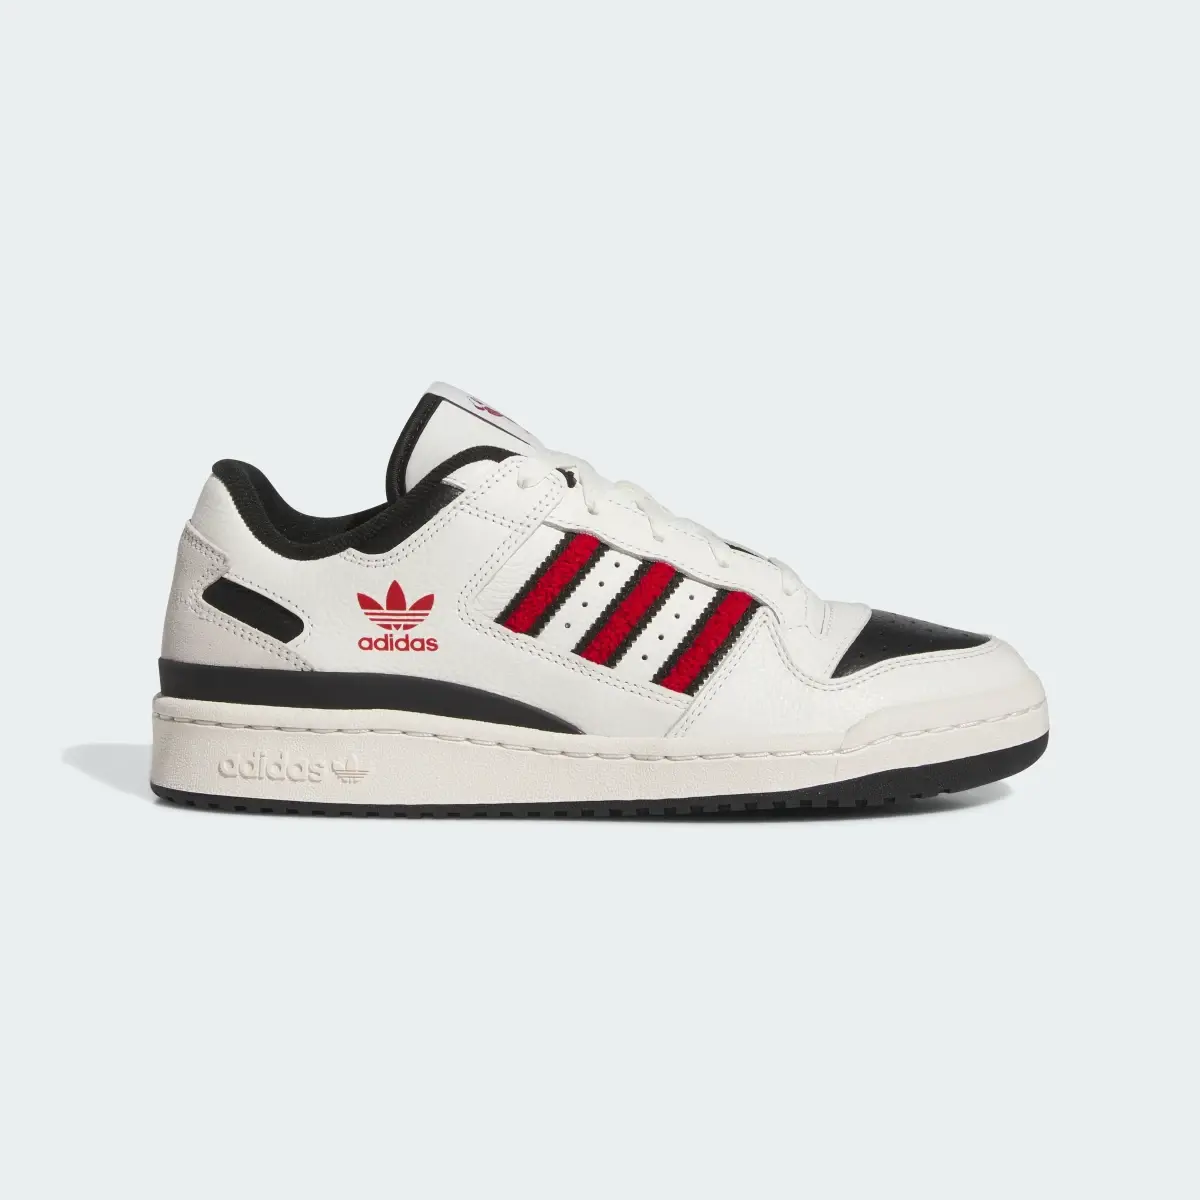 Adidas Louisville Forum Low Shoes. 2